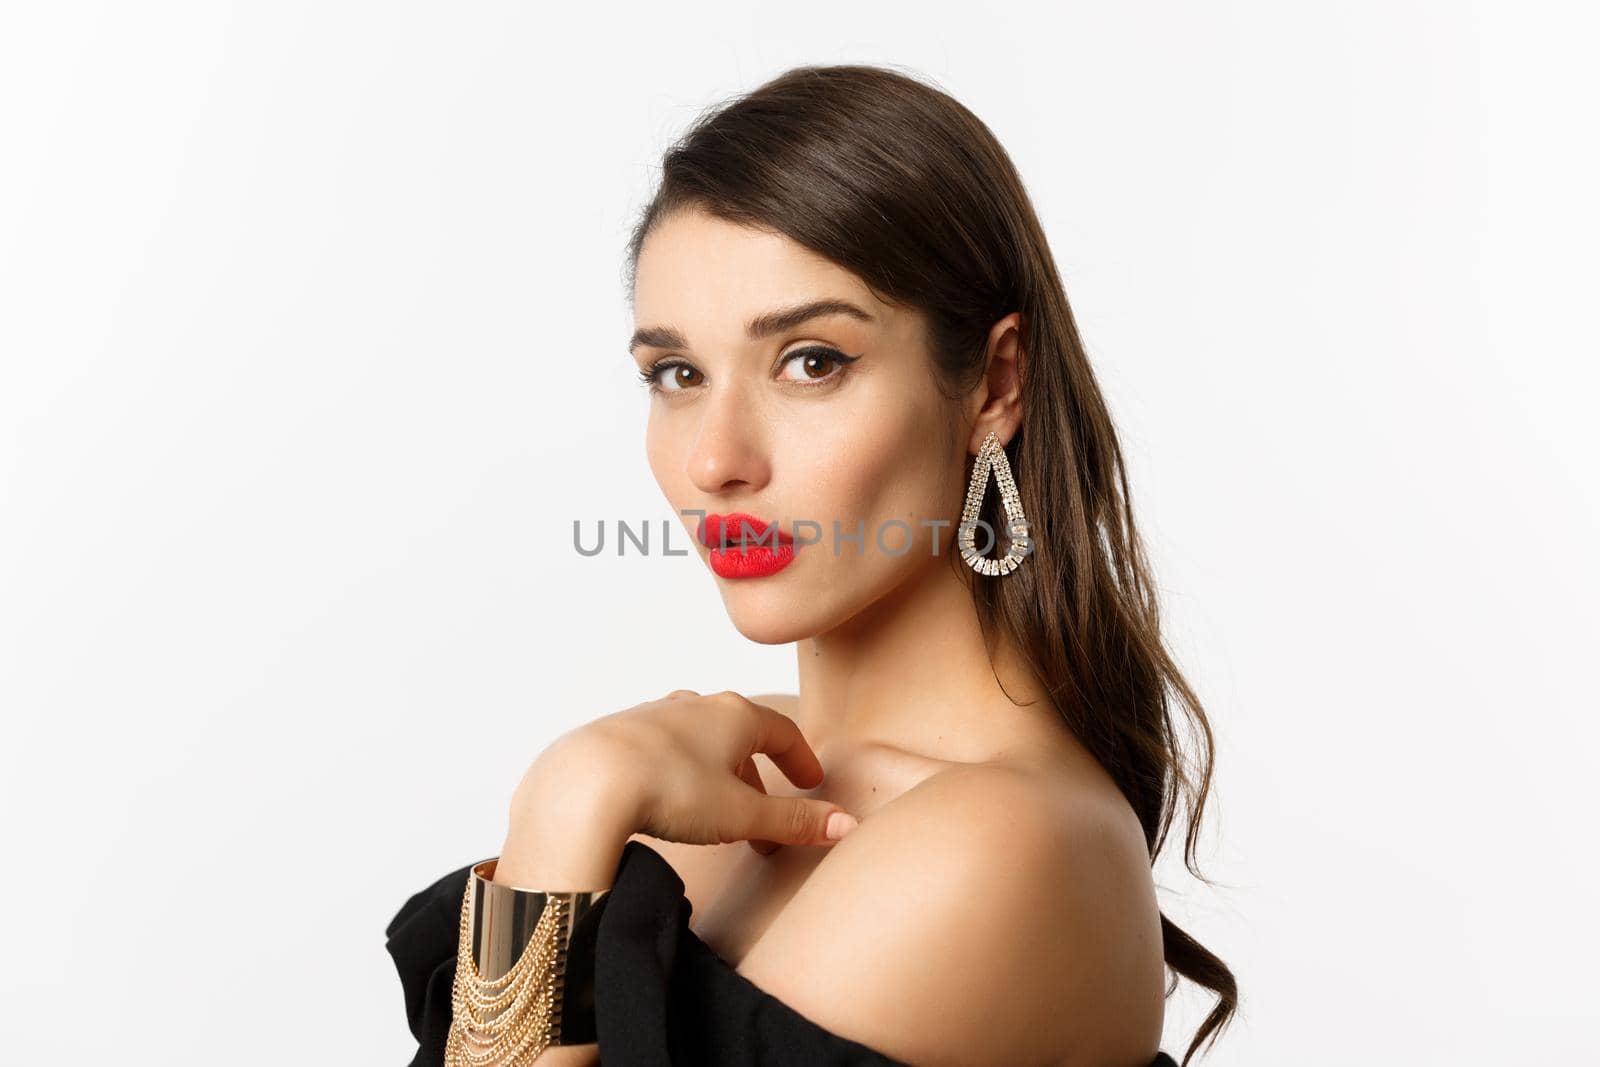 Fashion and beauty concept. Close-up of elegant woman with red lips, makeup and earrings, looking at camera self-assured, standing over white background.